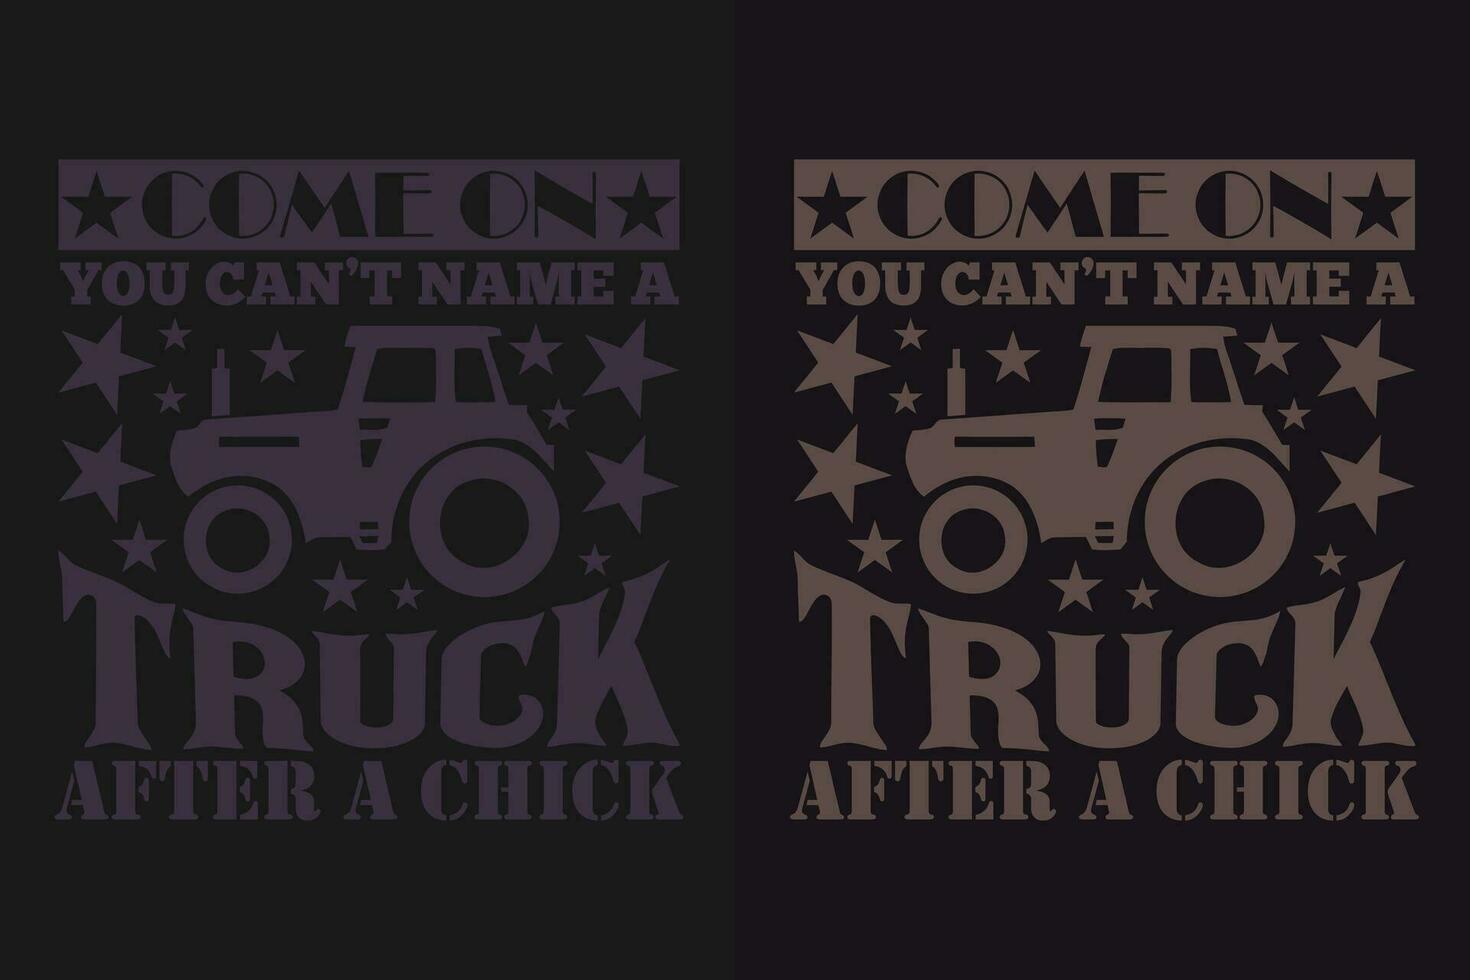 Come On You Can't Name A Truck After A Chick, Truck Shirt, Truck Driver Shirt, Funny Truck Shirt, Truck Driving Shirt, Truck Lover Shirt, Trucker Dad Shirt, Driver Birthday Gift vector